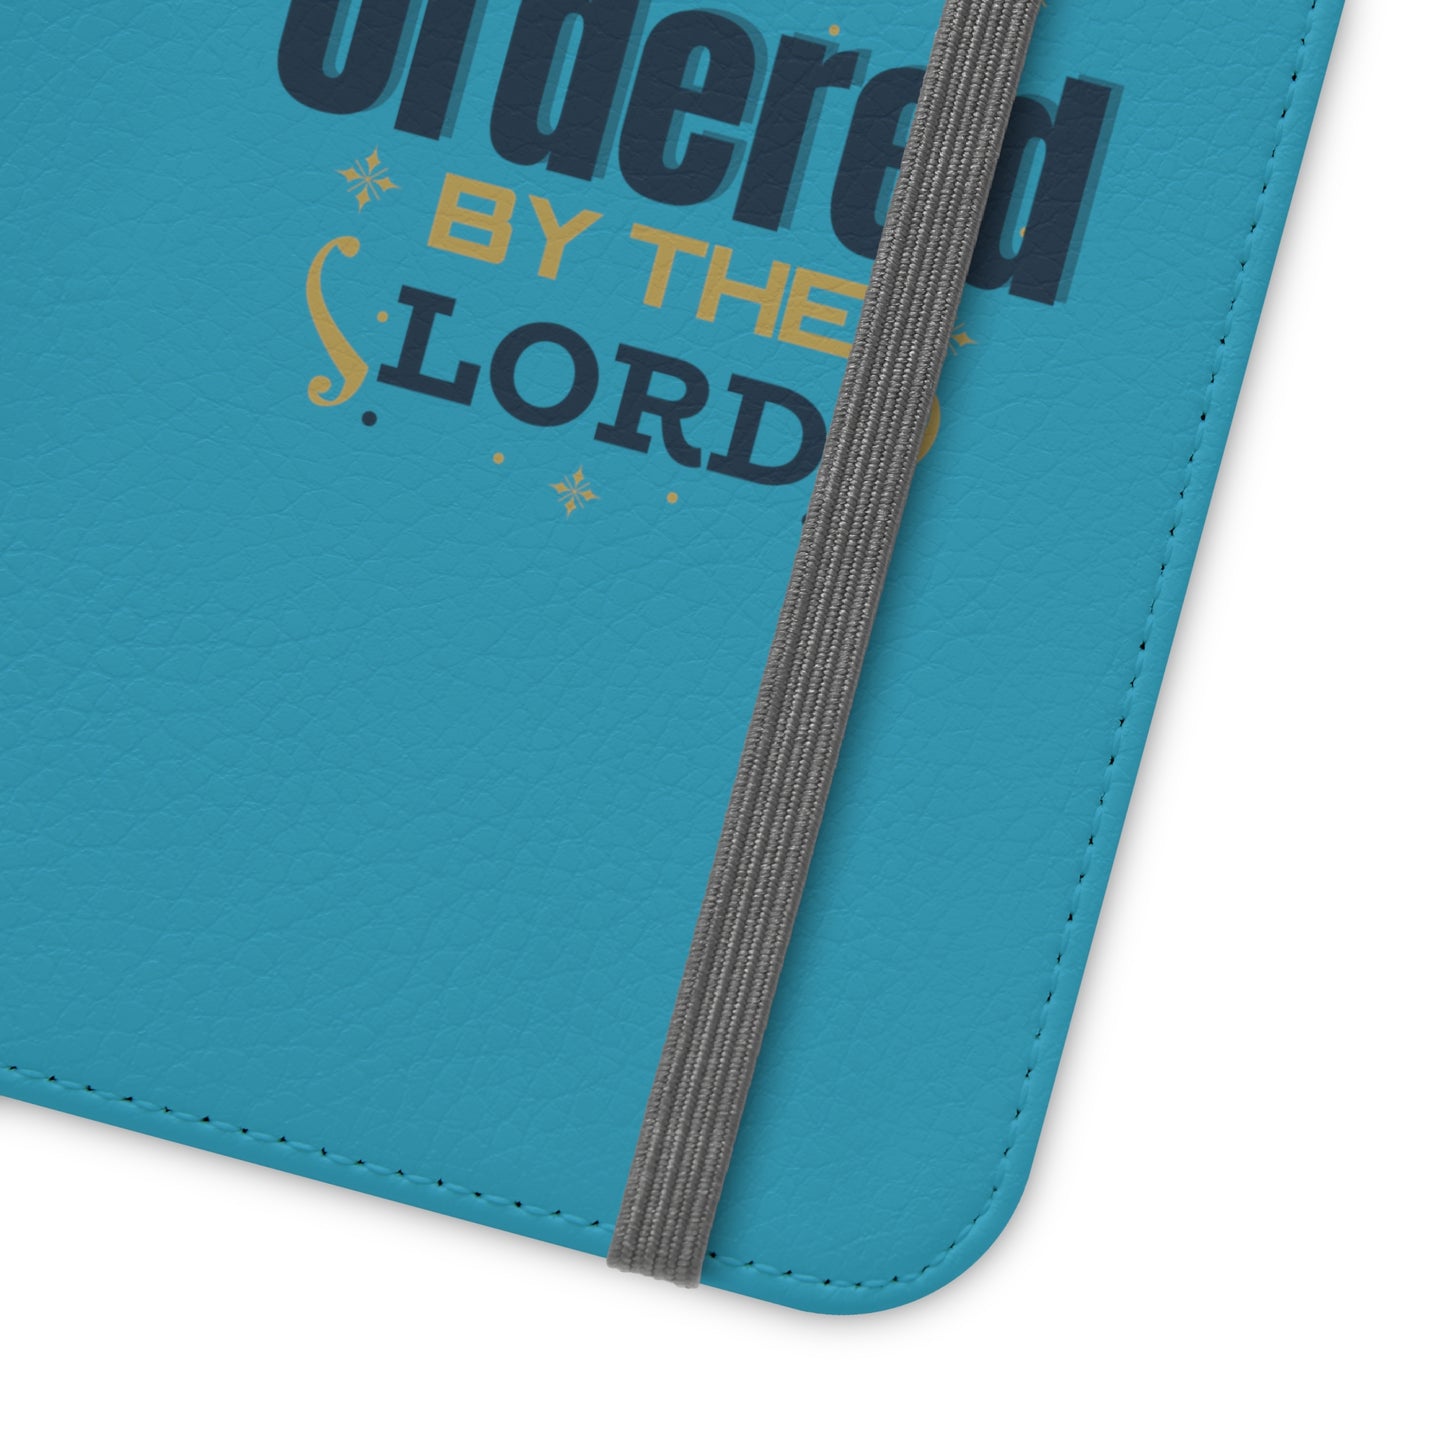 My Steps Are Ordered By The Lord  Phone Flip Cases